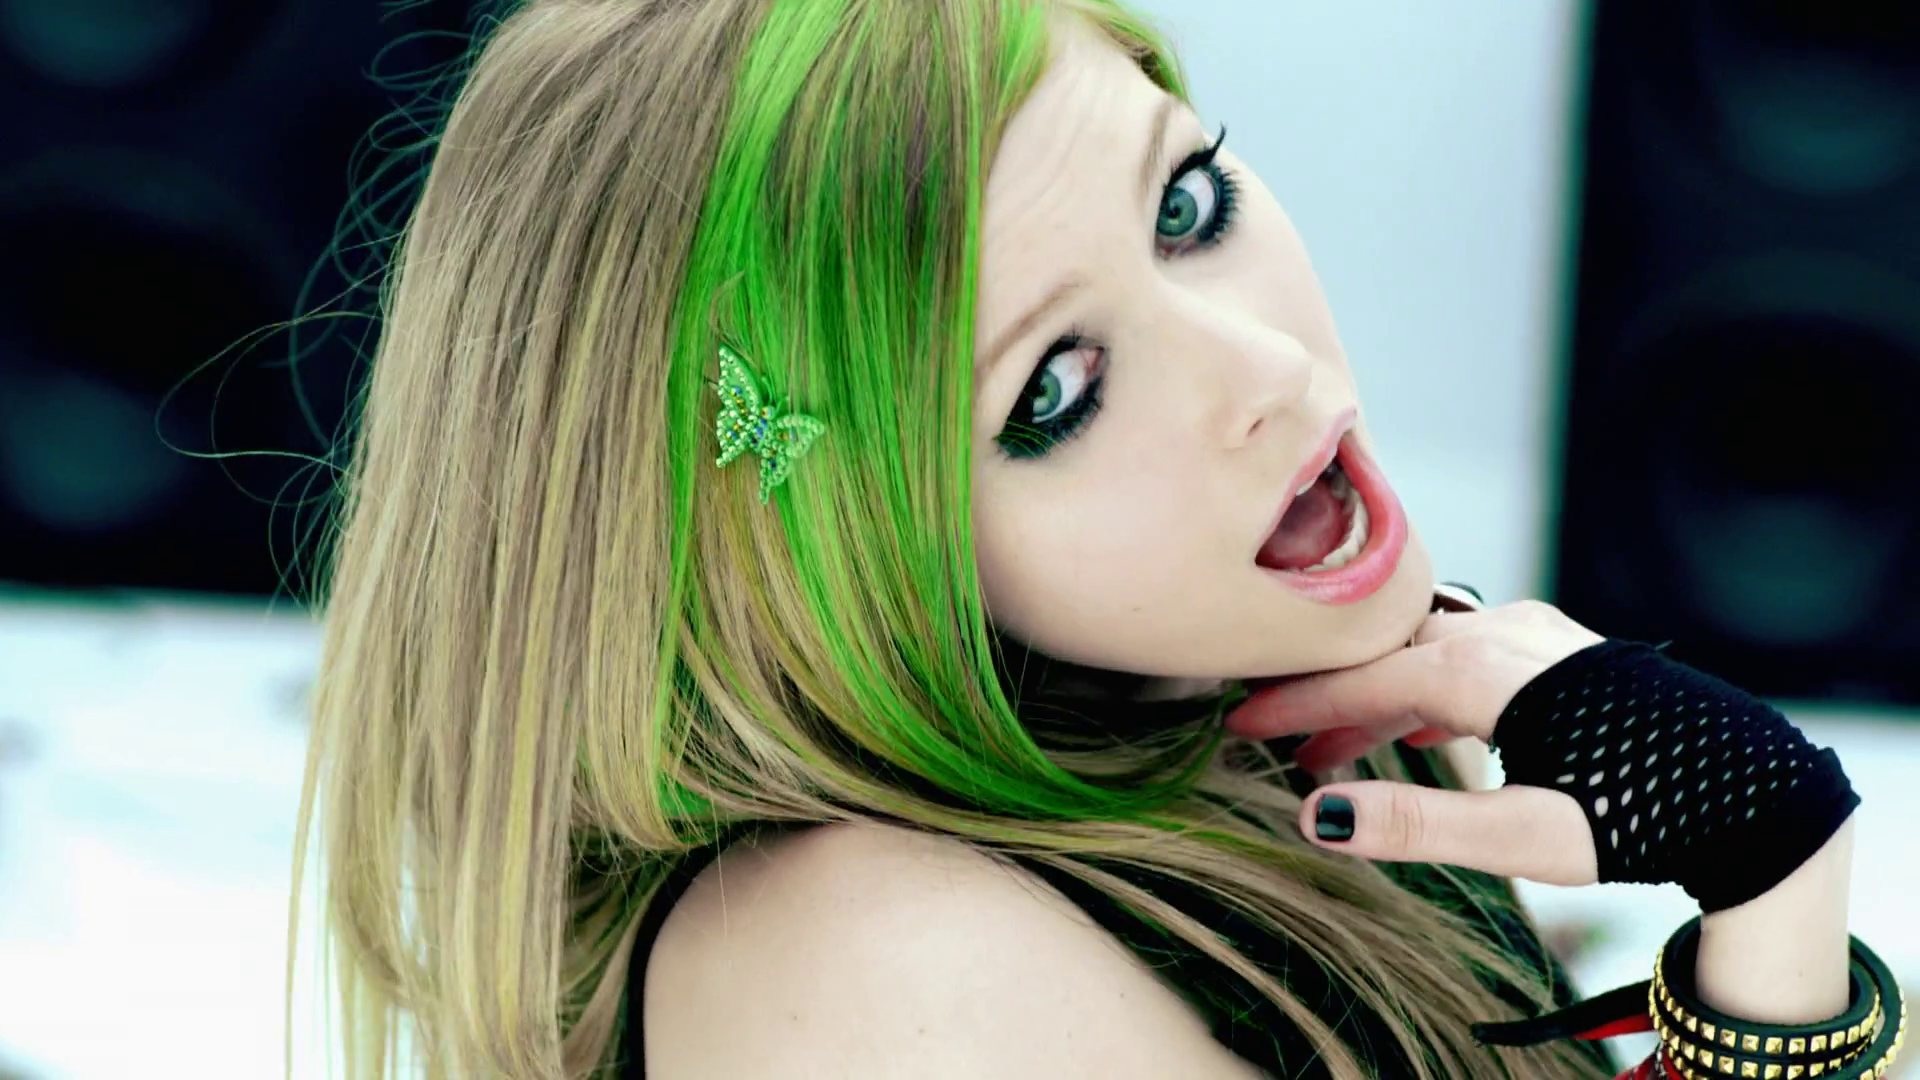 People 1920x1080 Avril Lavigne open mouth singer green hair celebrity women face makeup painted nails blonde dyed hair women indoors smoky eyes gloves